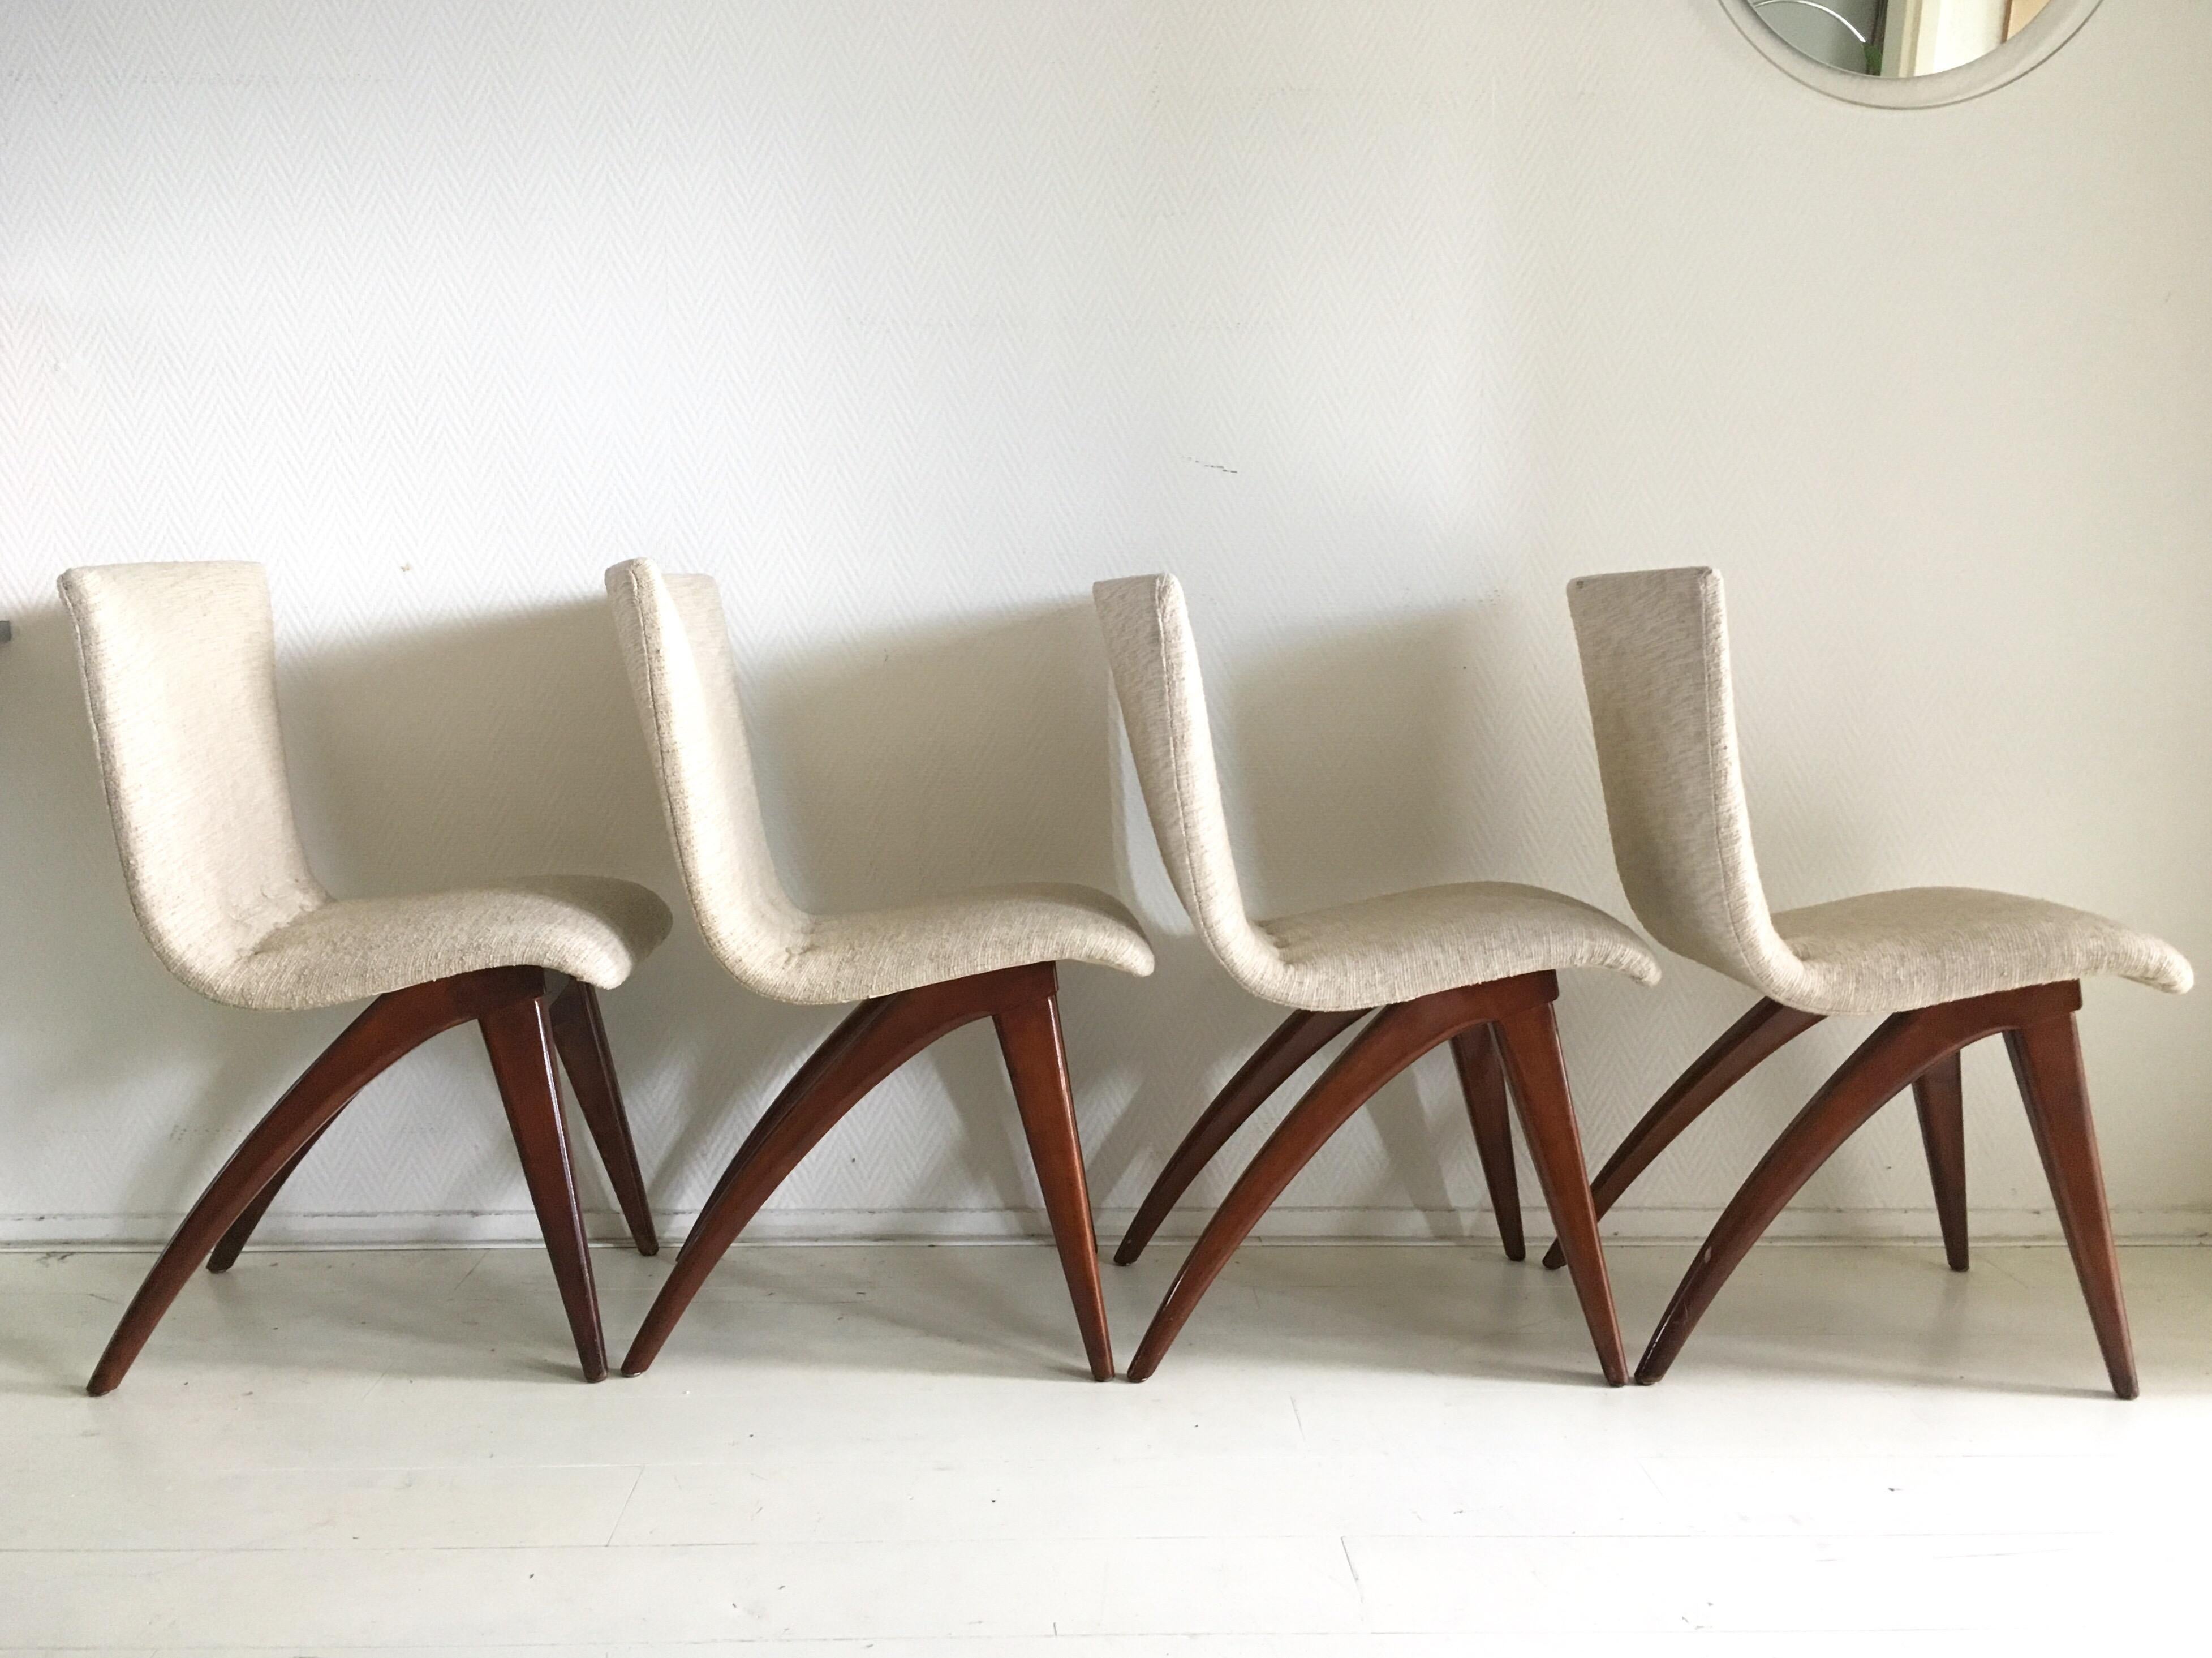 Wonderful sculptural set consisting of four chairs with brown lacquered wooden legs and a flexible, comfortable seating upholstered with off-white/cream colored fabric. All of the chairs remain in very good and sturdy however one chair has a small